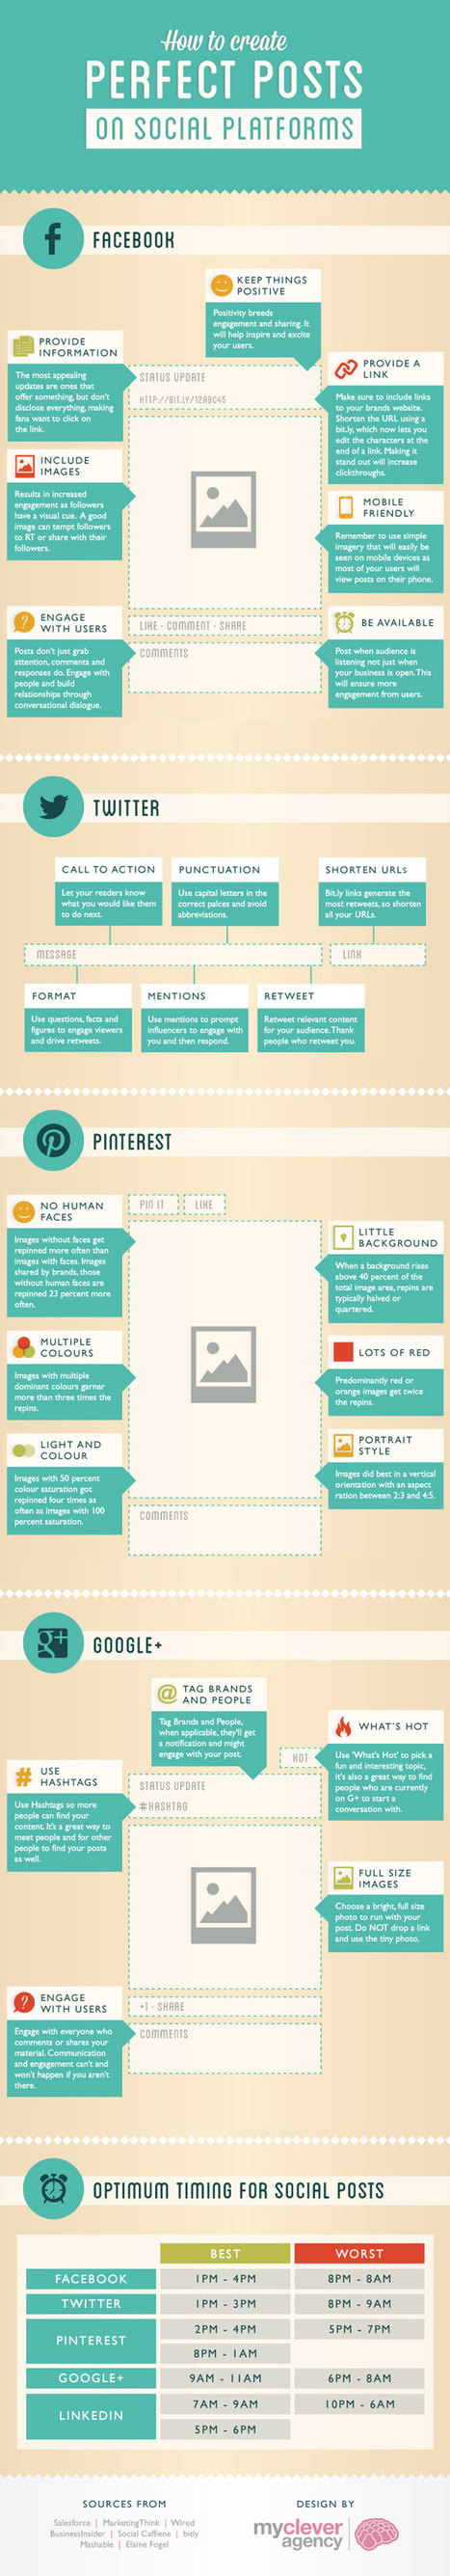 How To Create Effective Posts on the 4 Main Social Sites [Infographic] | e-commerce & social media | Scoop.it